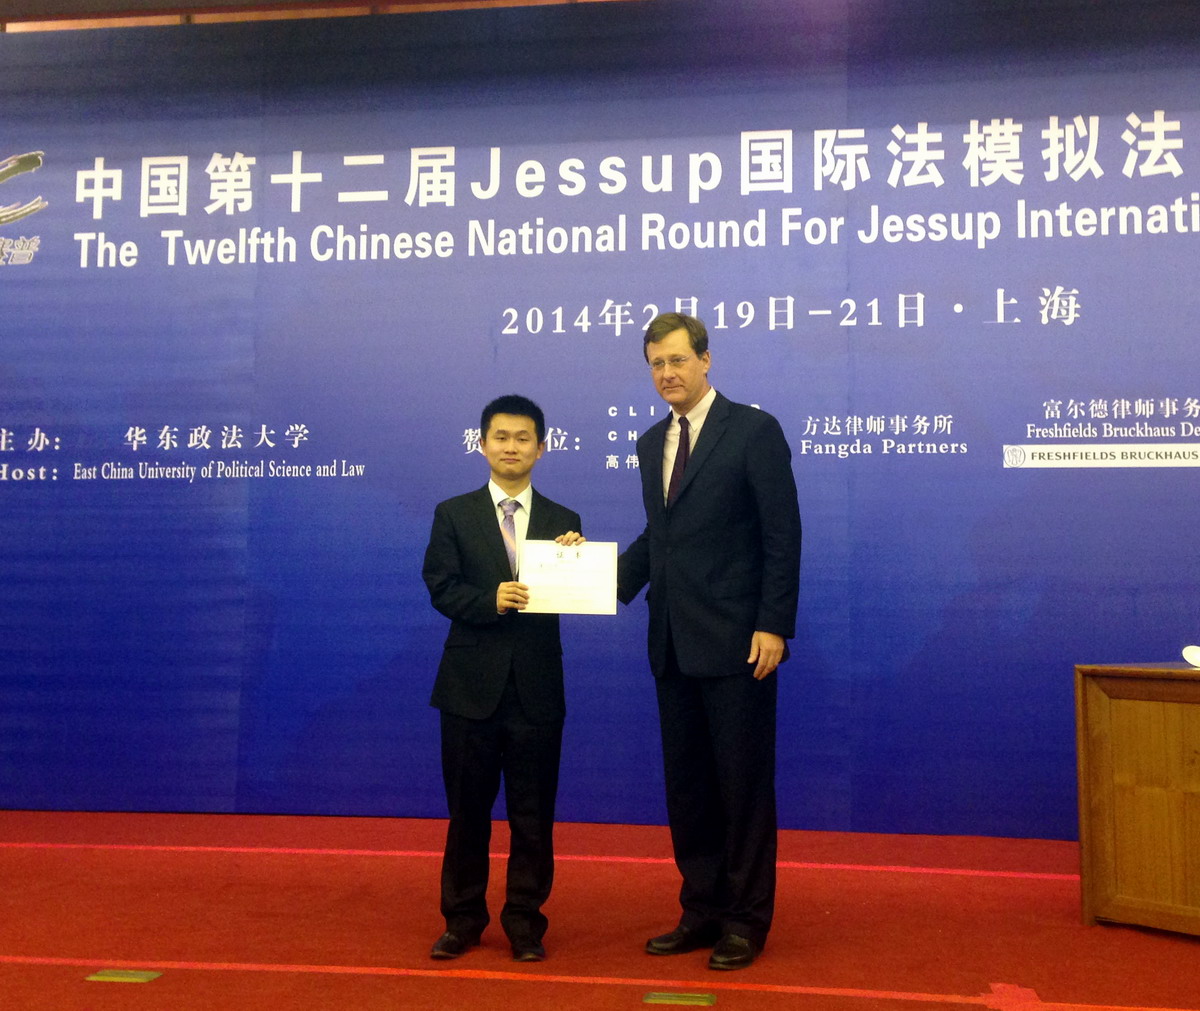 XMU Won the Championship in the 12th Chinese National Round for Jessup International Law Moot Court Competition